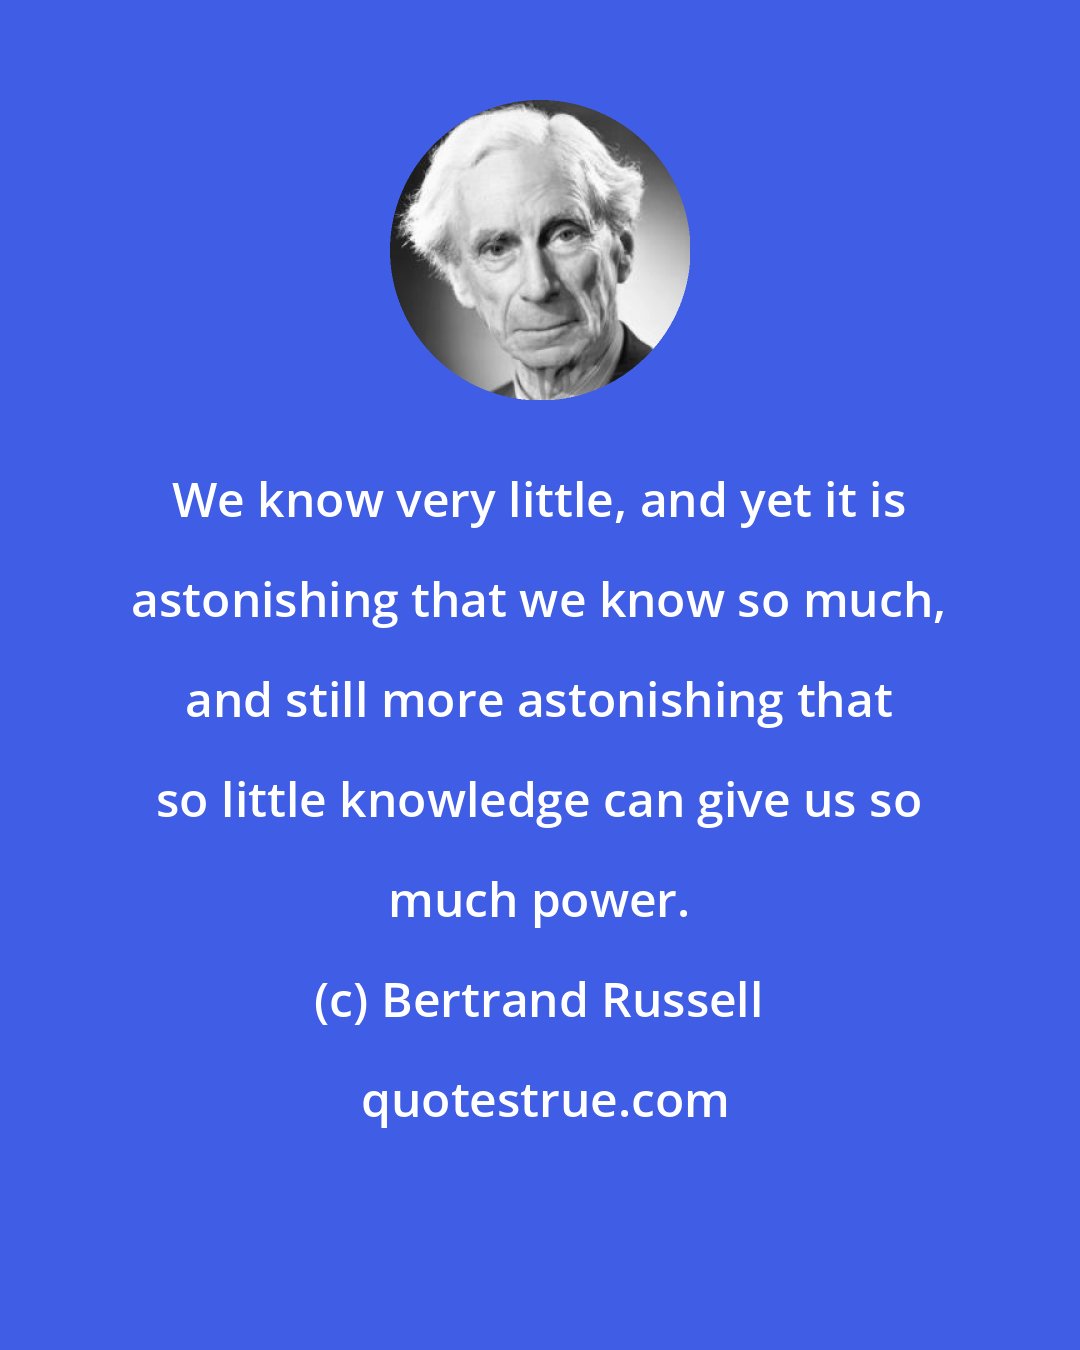 Bertrand Russell: We know very little, and yet it is astonishing that we know so much, and still more astonishing that so little knowledge can give us so much power.